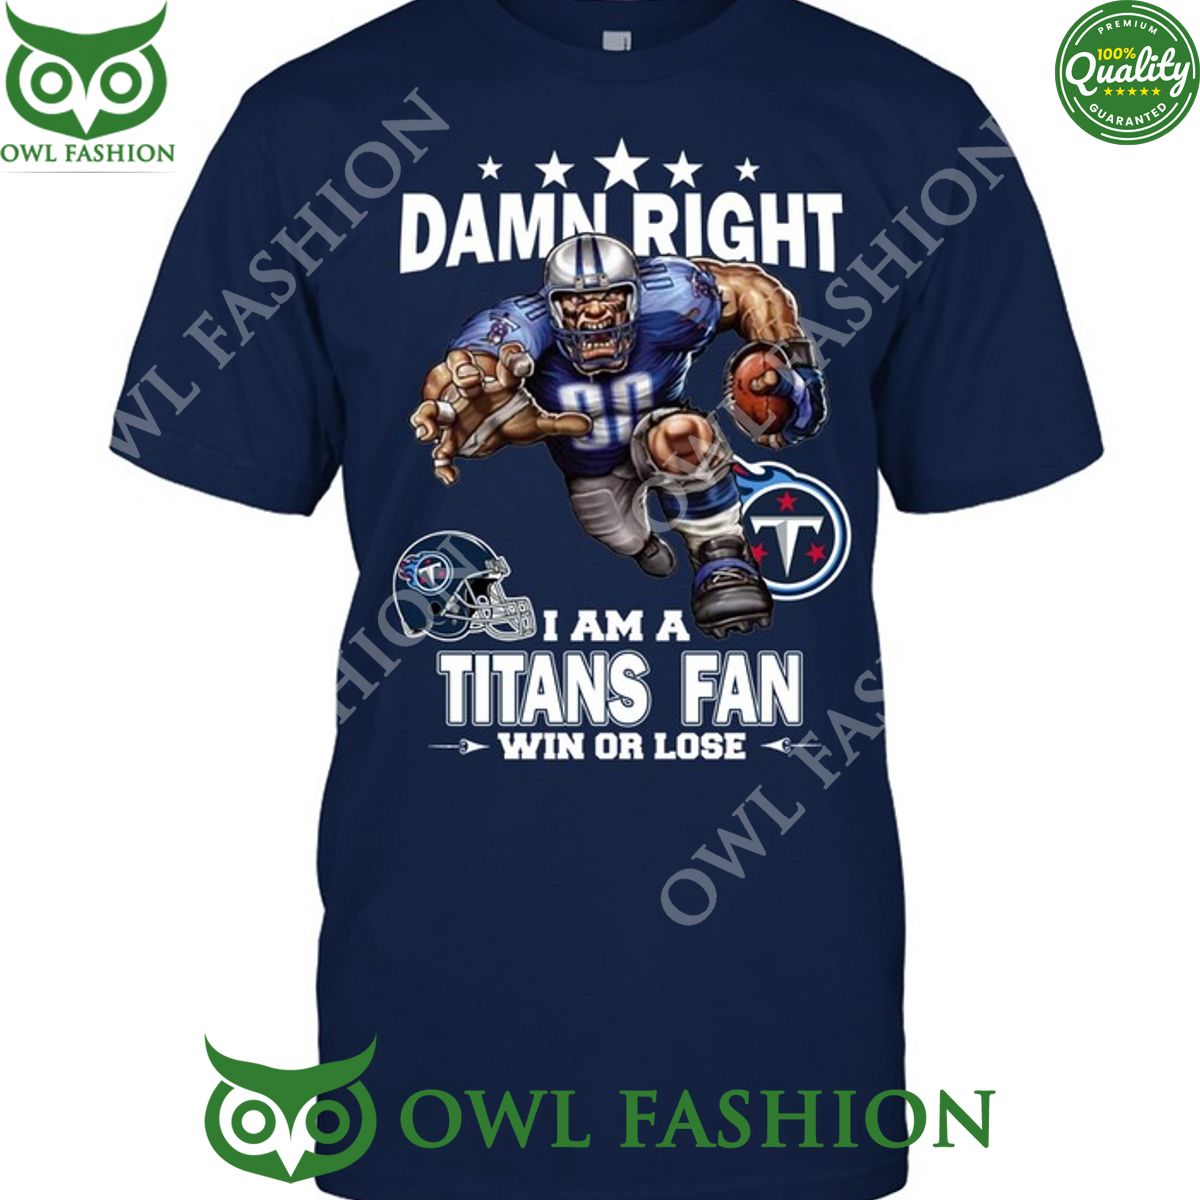 Damn Right Tennessee Titans NFL Fan Win or lose t shirt